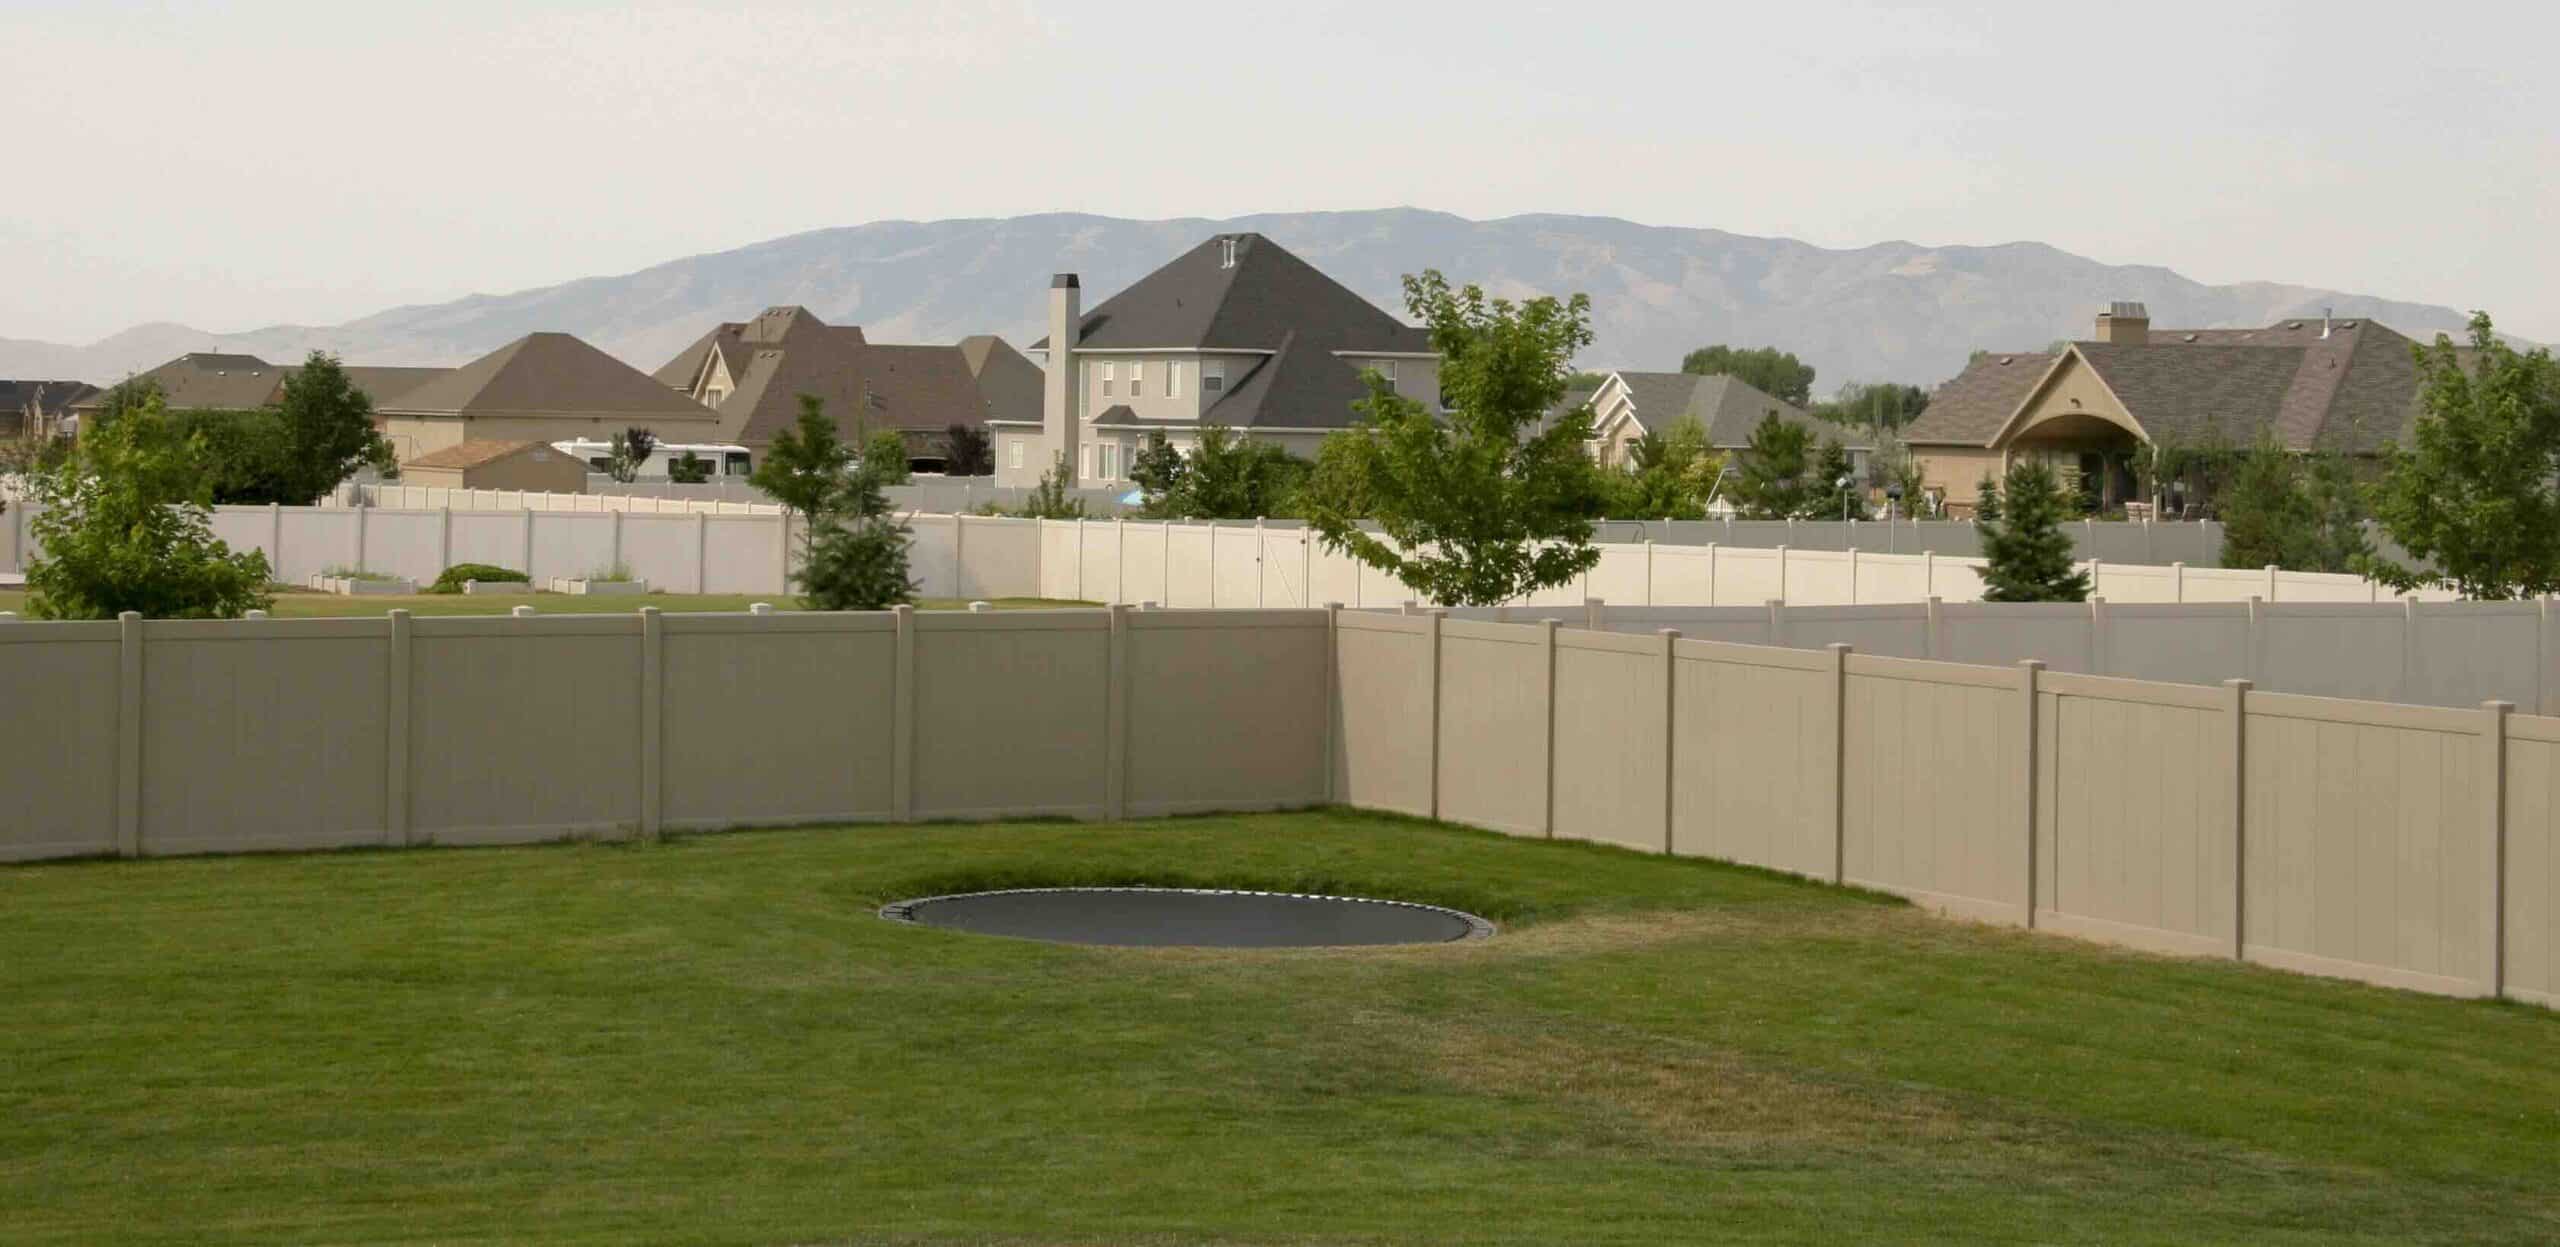 privacy fences in a neighborhood